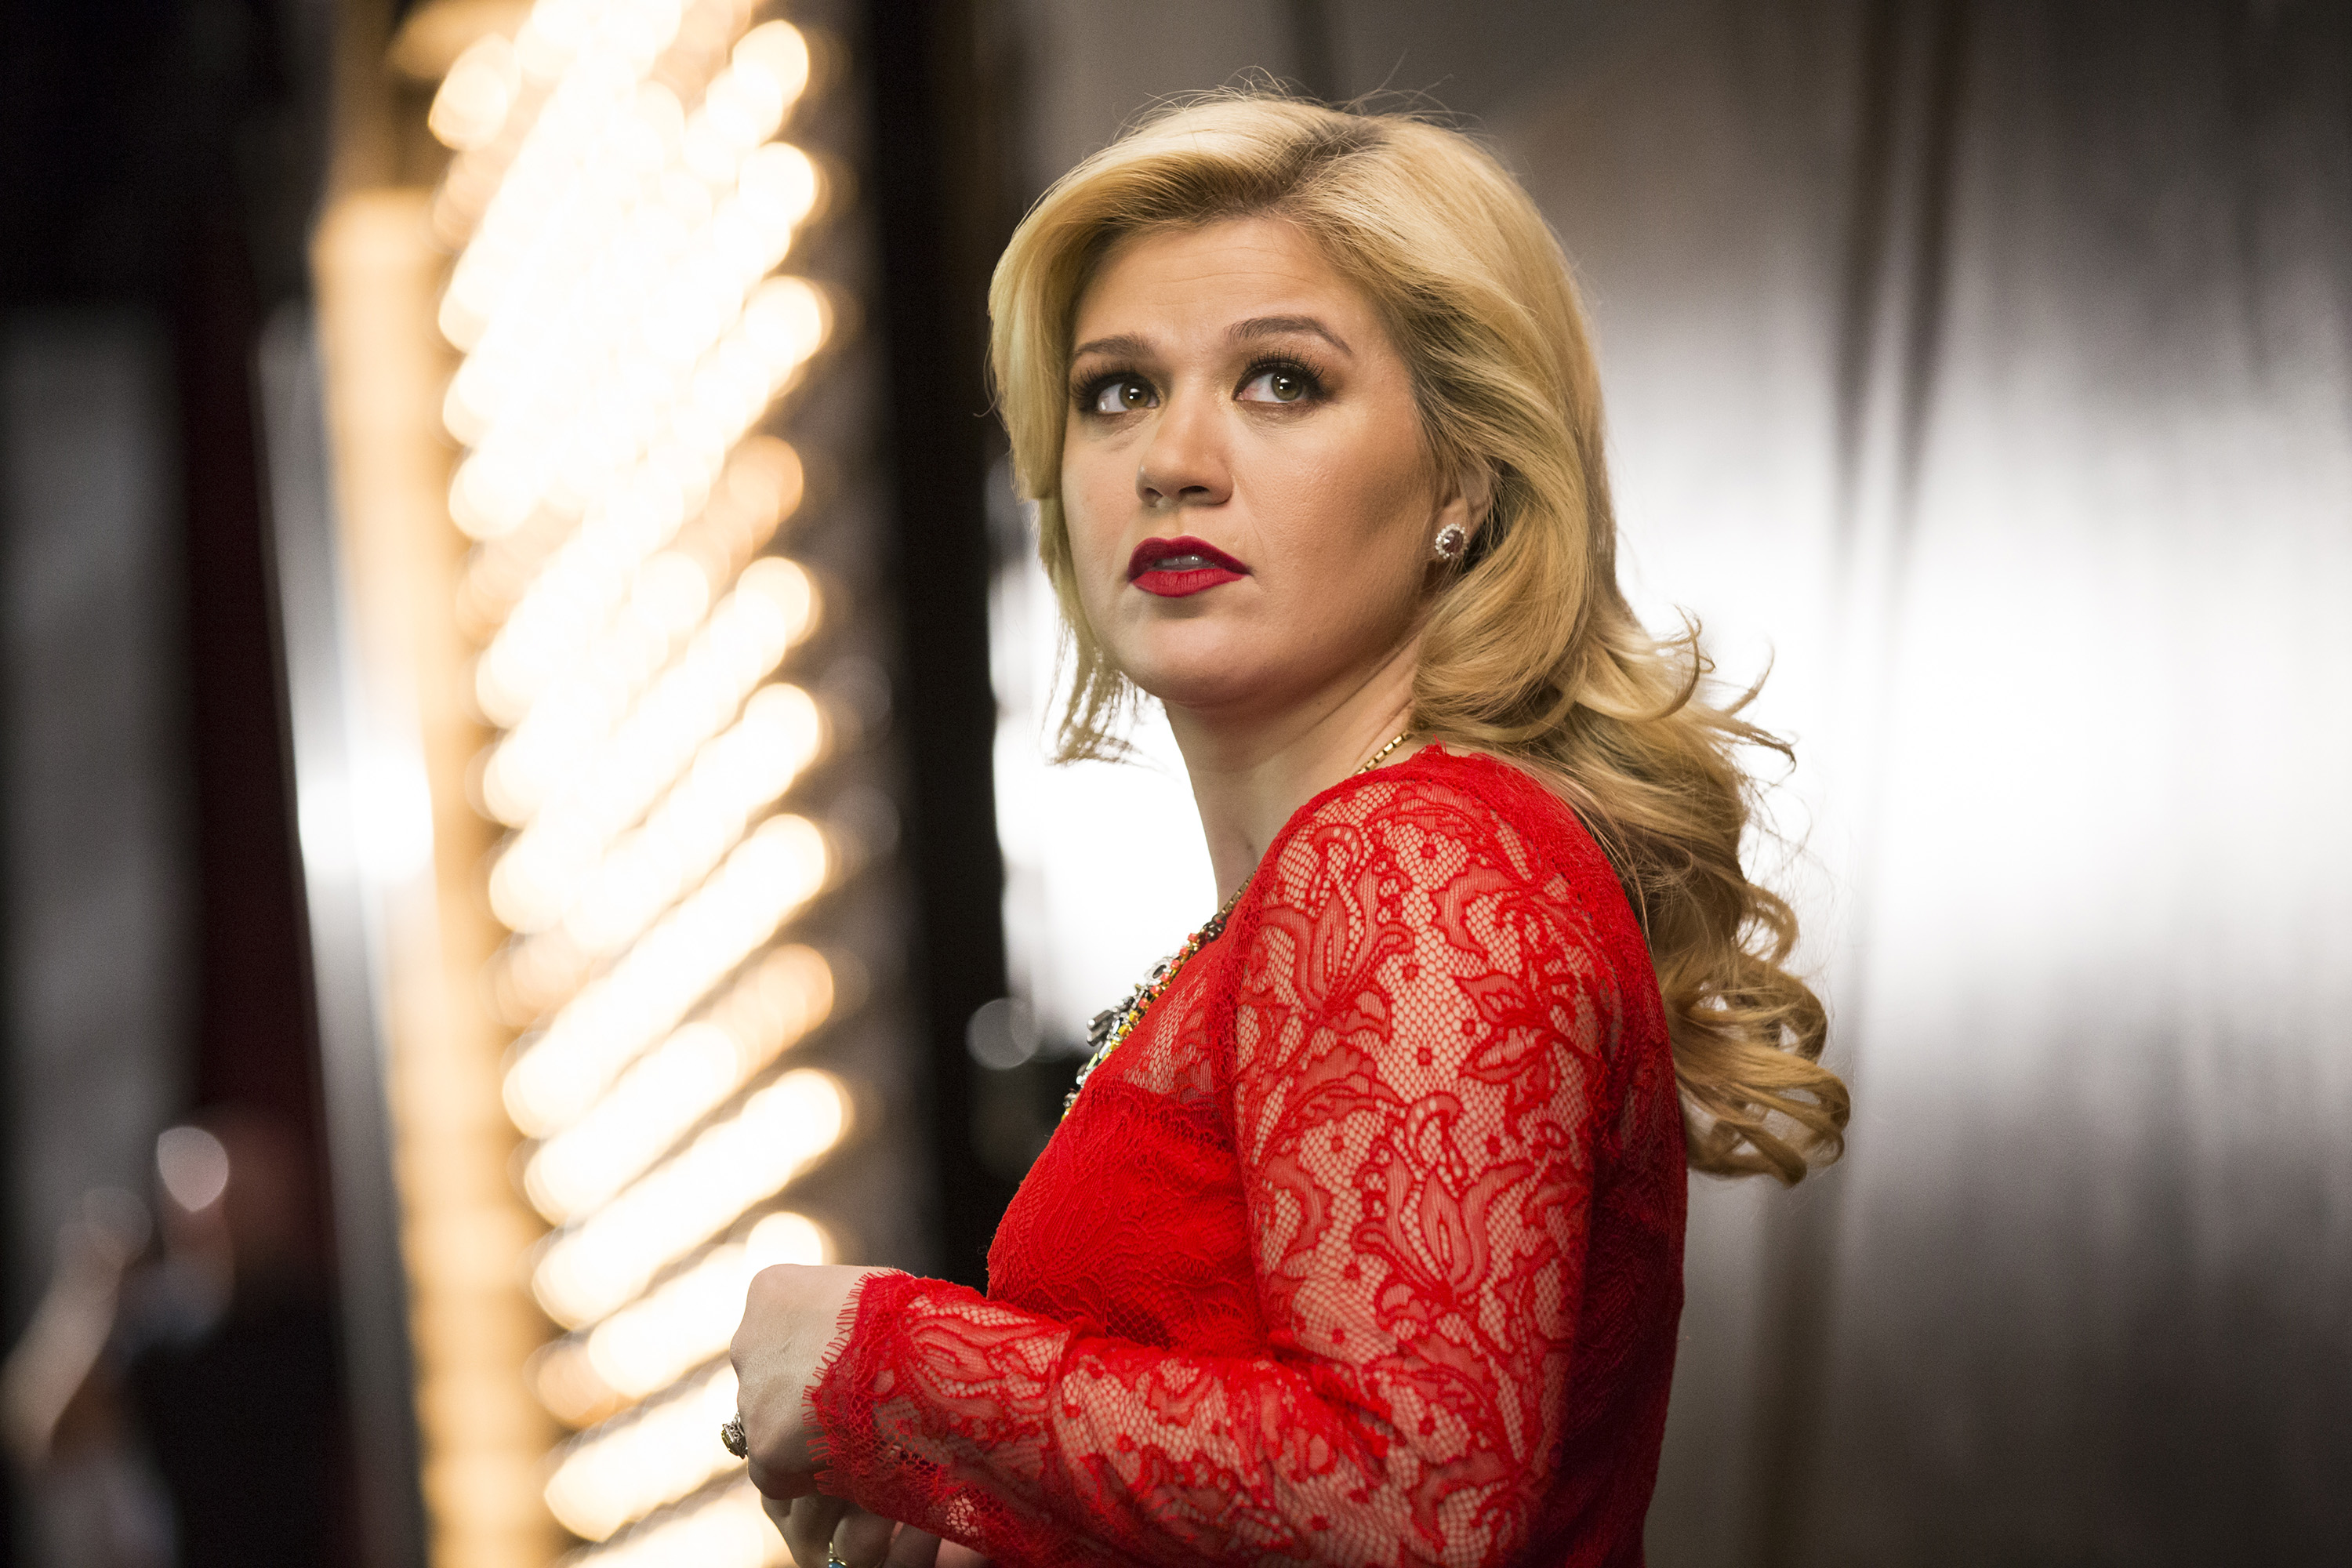 Kelly Clarkson photographed in 2013 (NBC—NBCU Photo Bank via Getty Images)